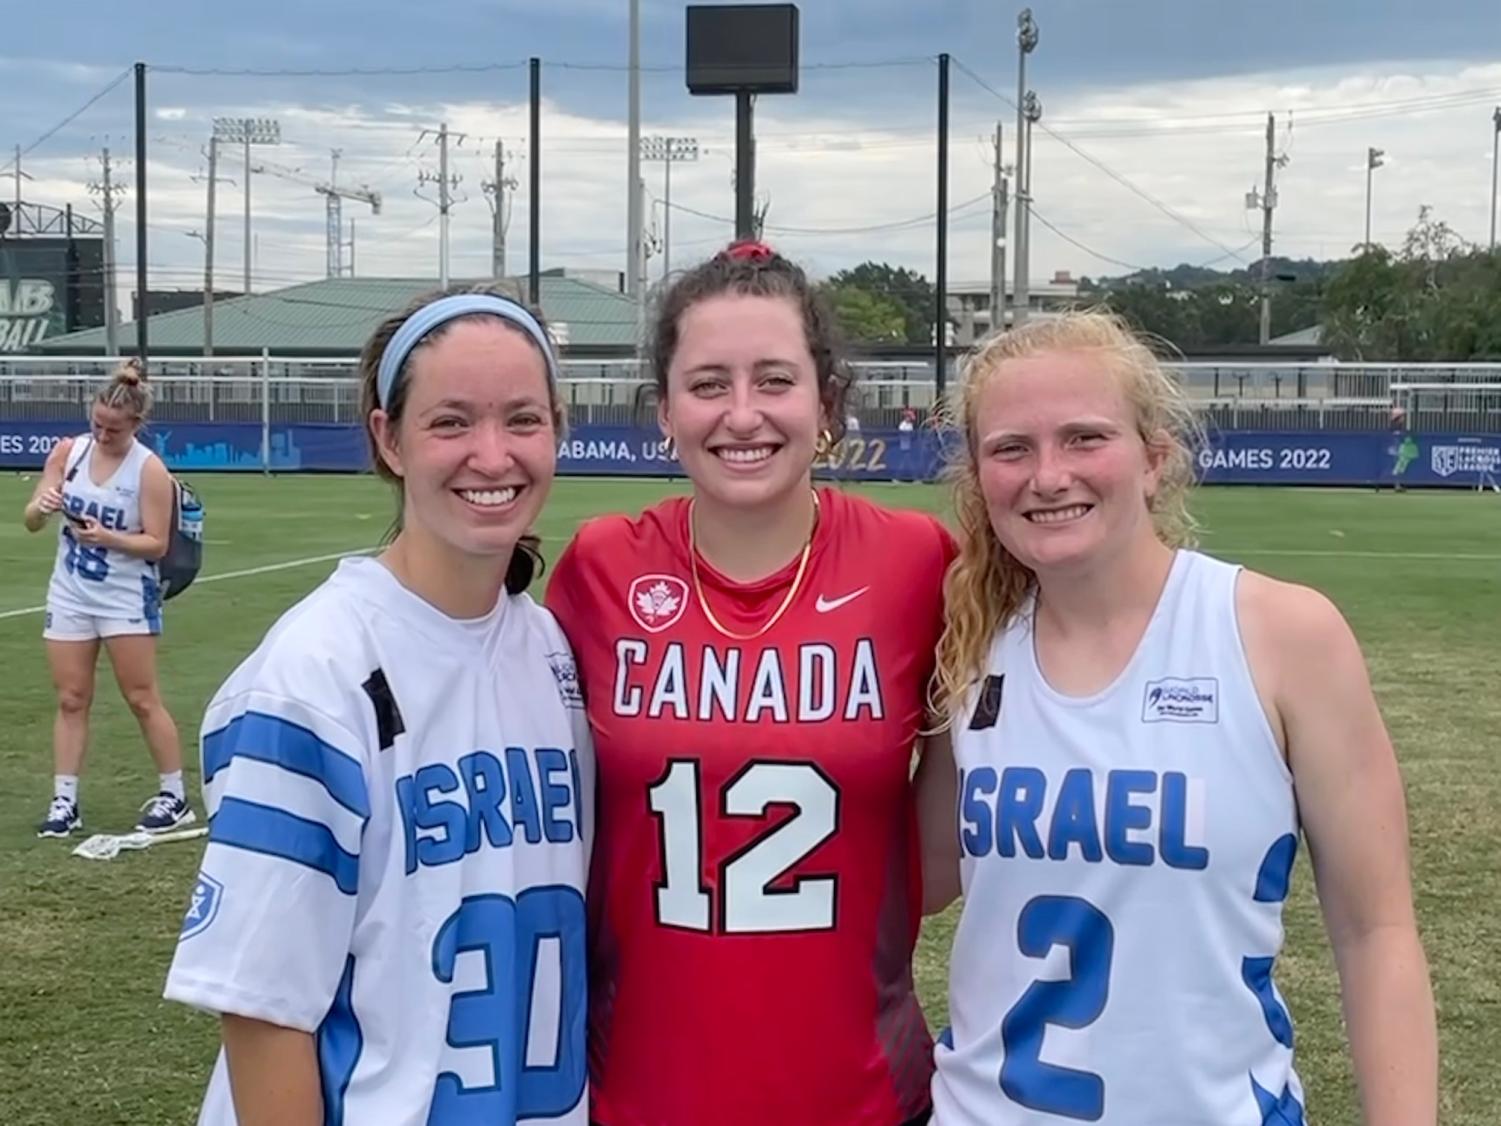 Three+lacrosse+players+stand+side+by+side.+Two+wear+blue-and-white+Israel+jerseys+and+the+third+wears+a+red+Canada+jersey.